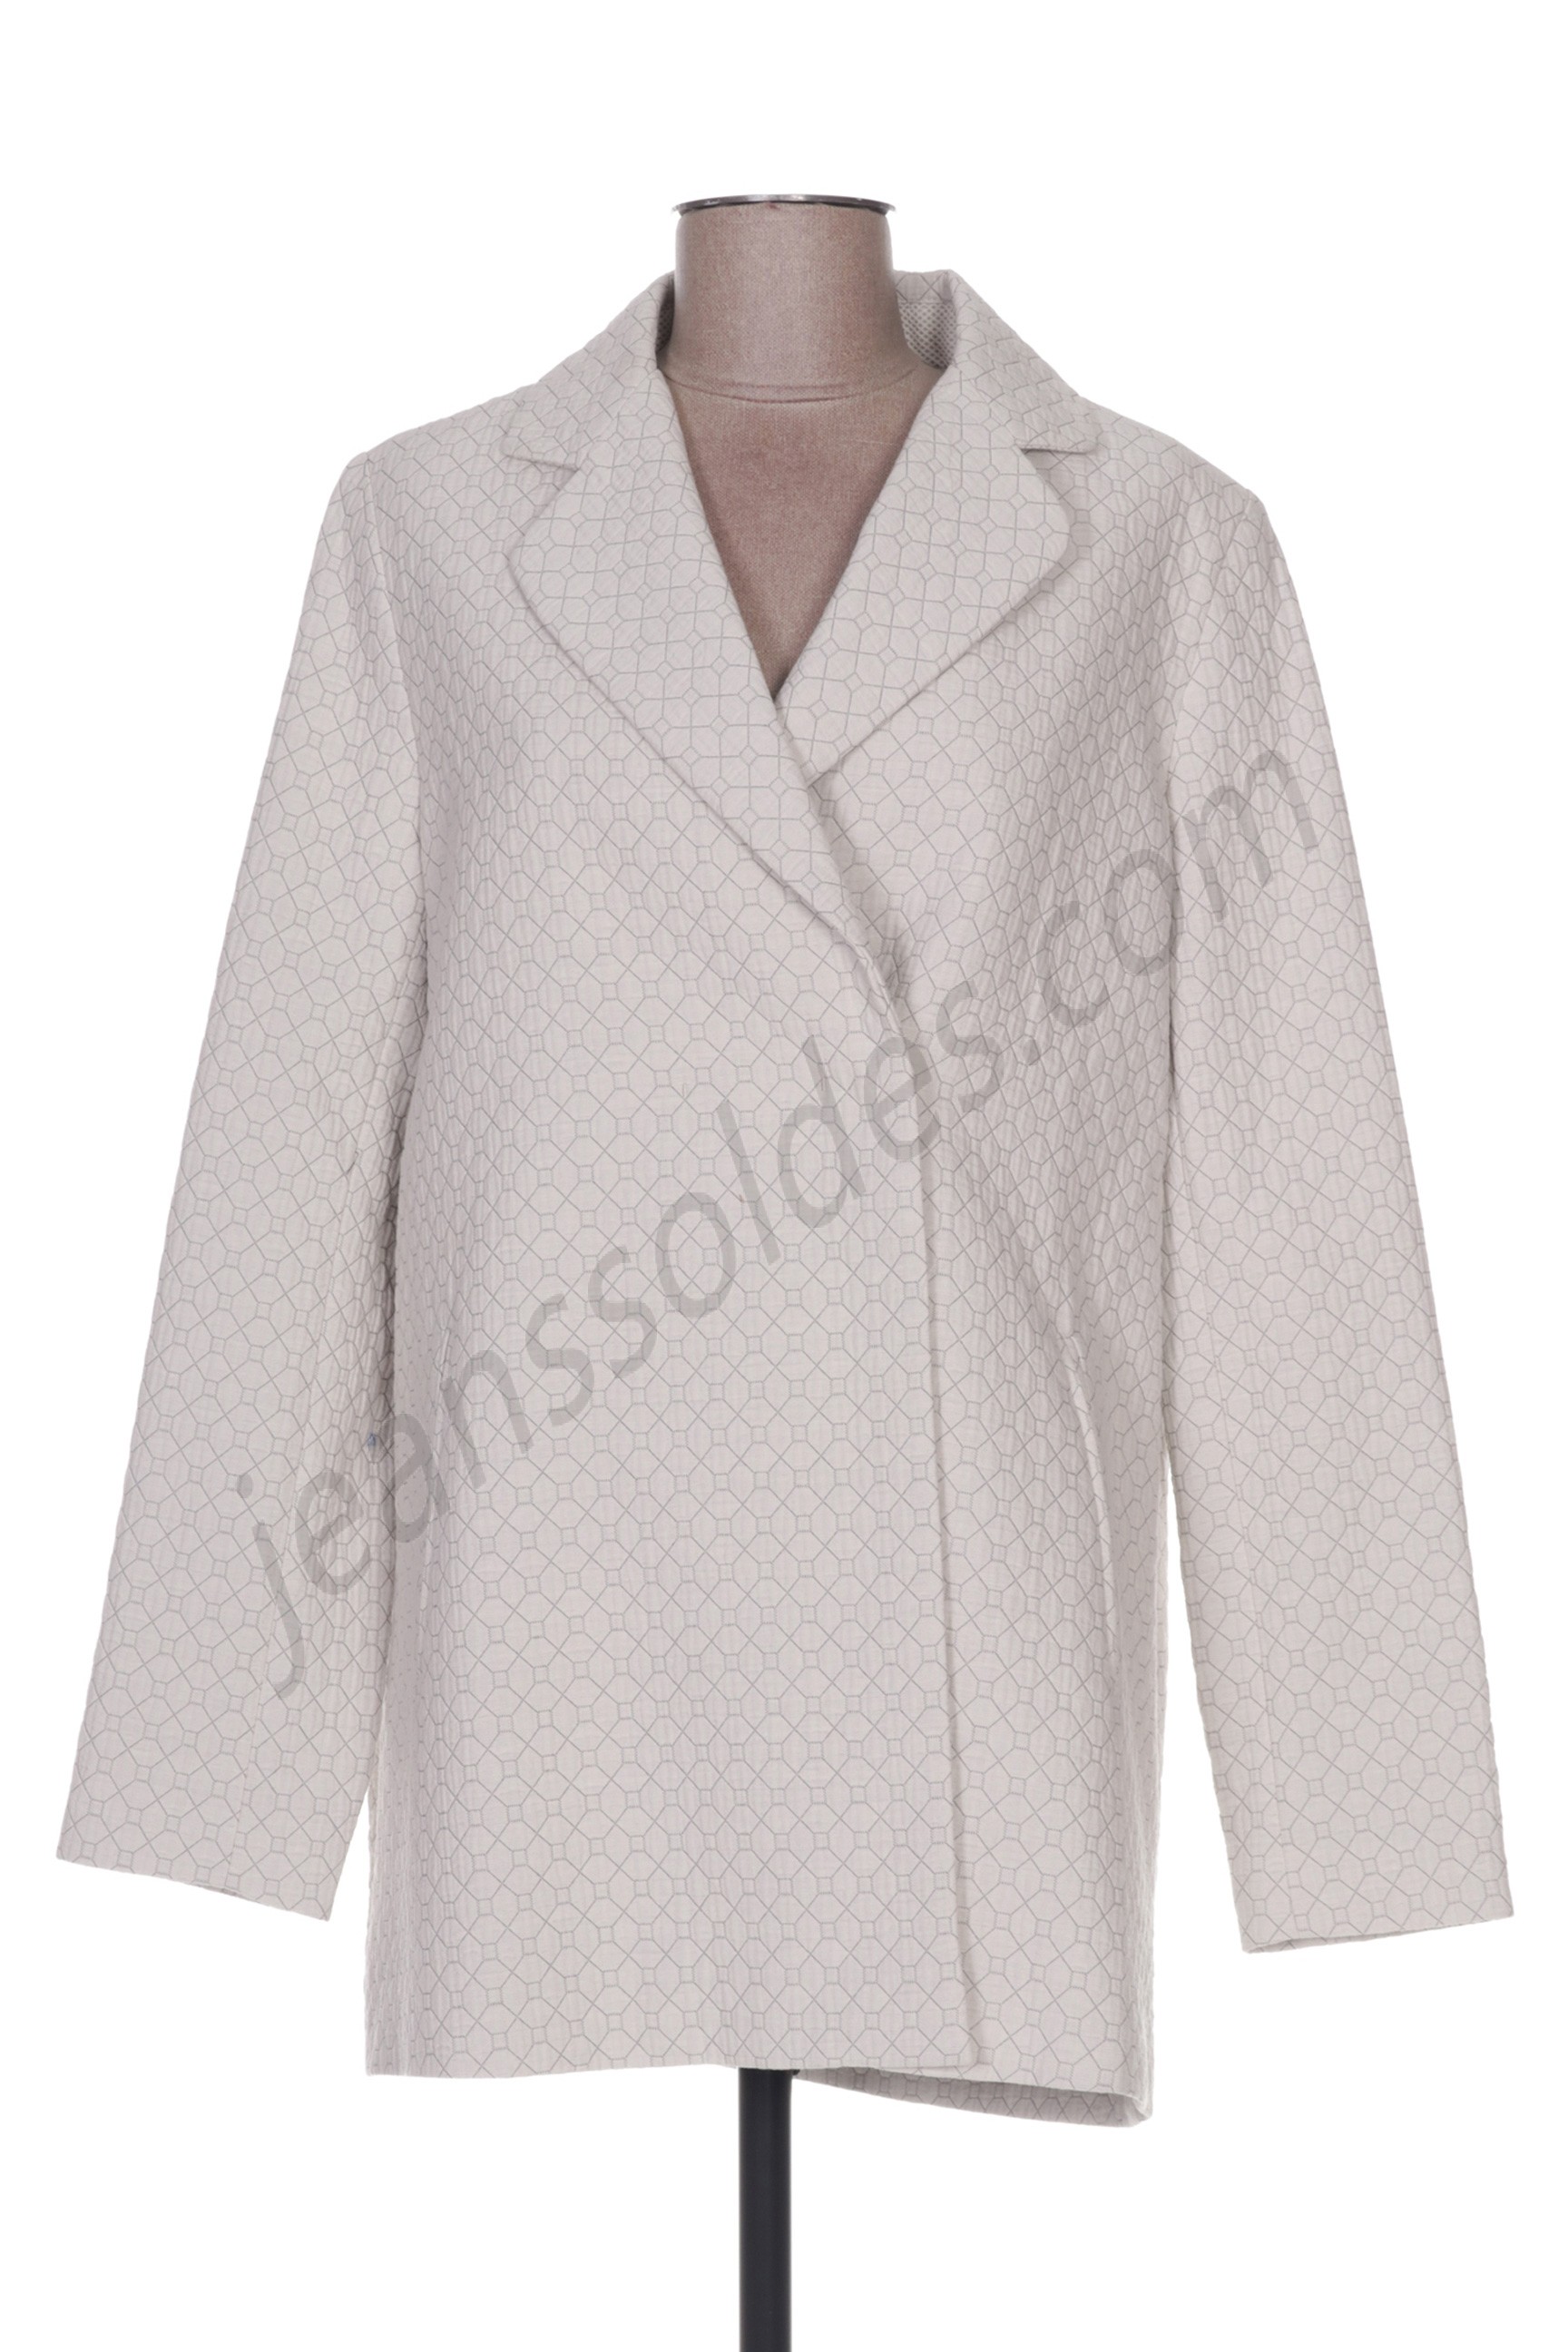 trench & coat-Manteau court prix d’amis - trench & coat-Manteau court prix d’amis